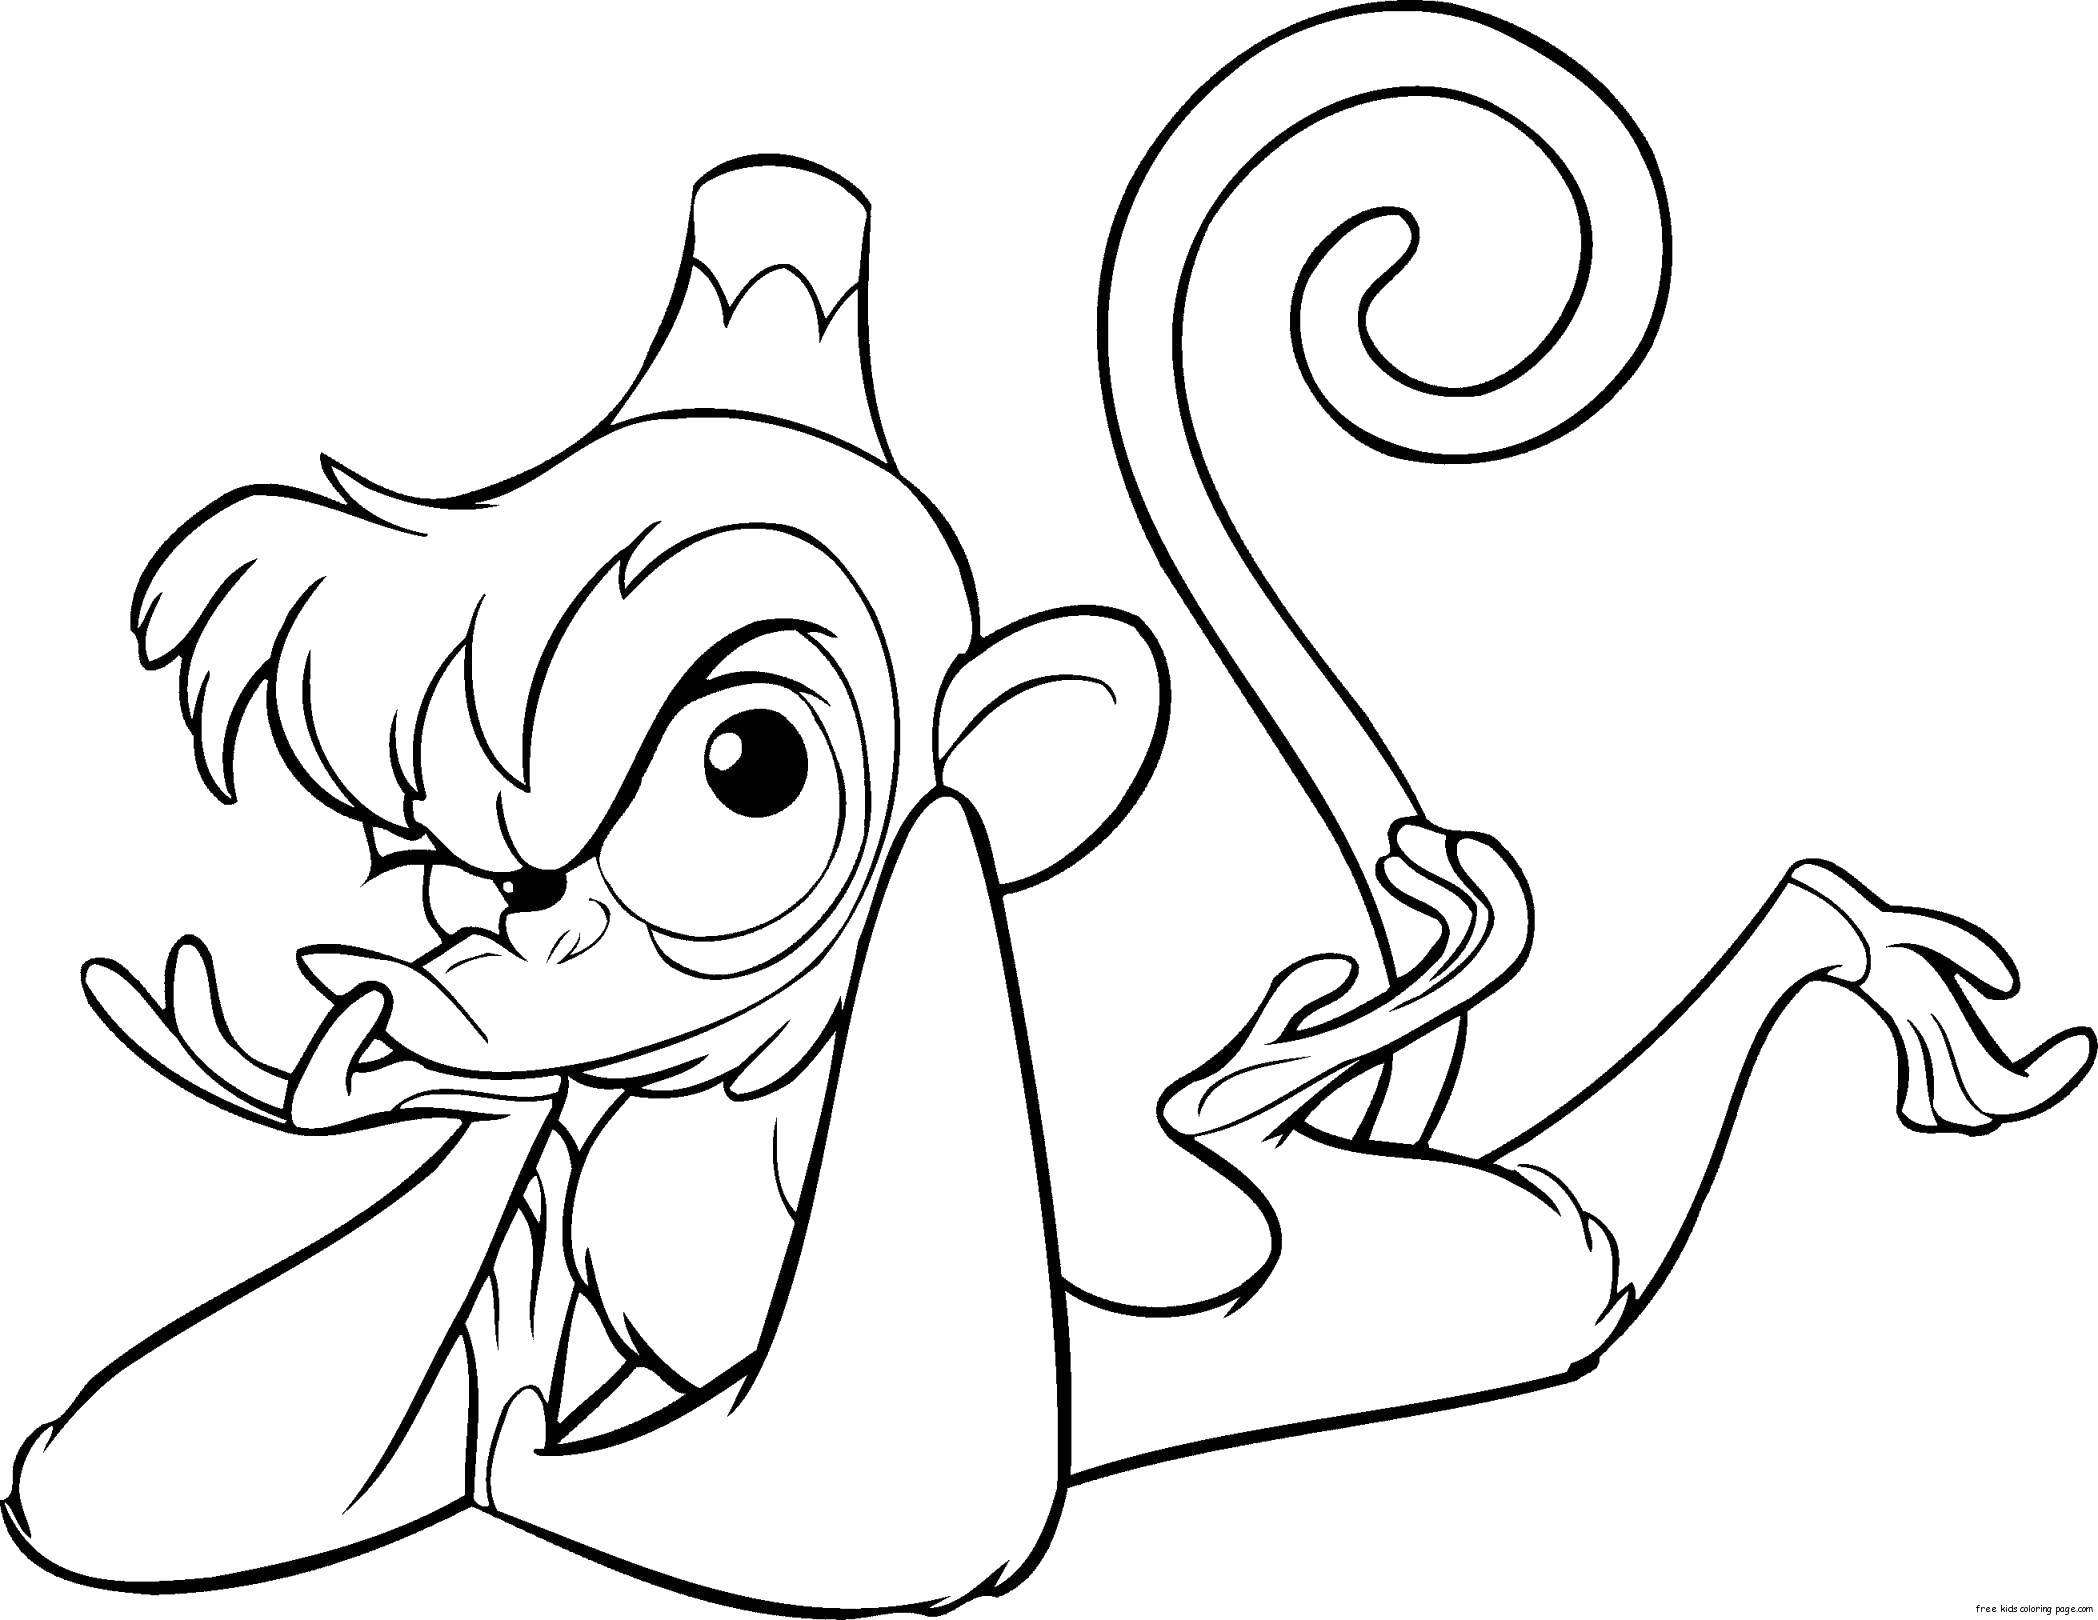 Coloring The monkey from Aladdin . Category Disney coloring pages. Tags:  Disney, Aladdin, Jasmine.